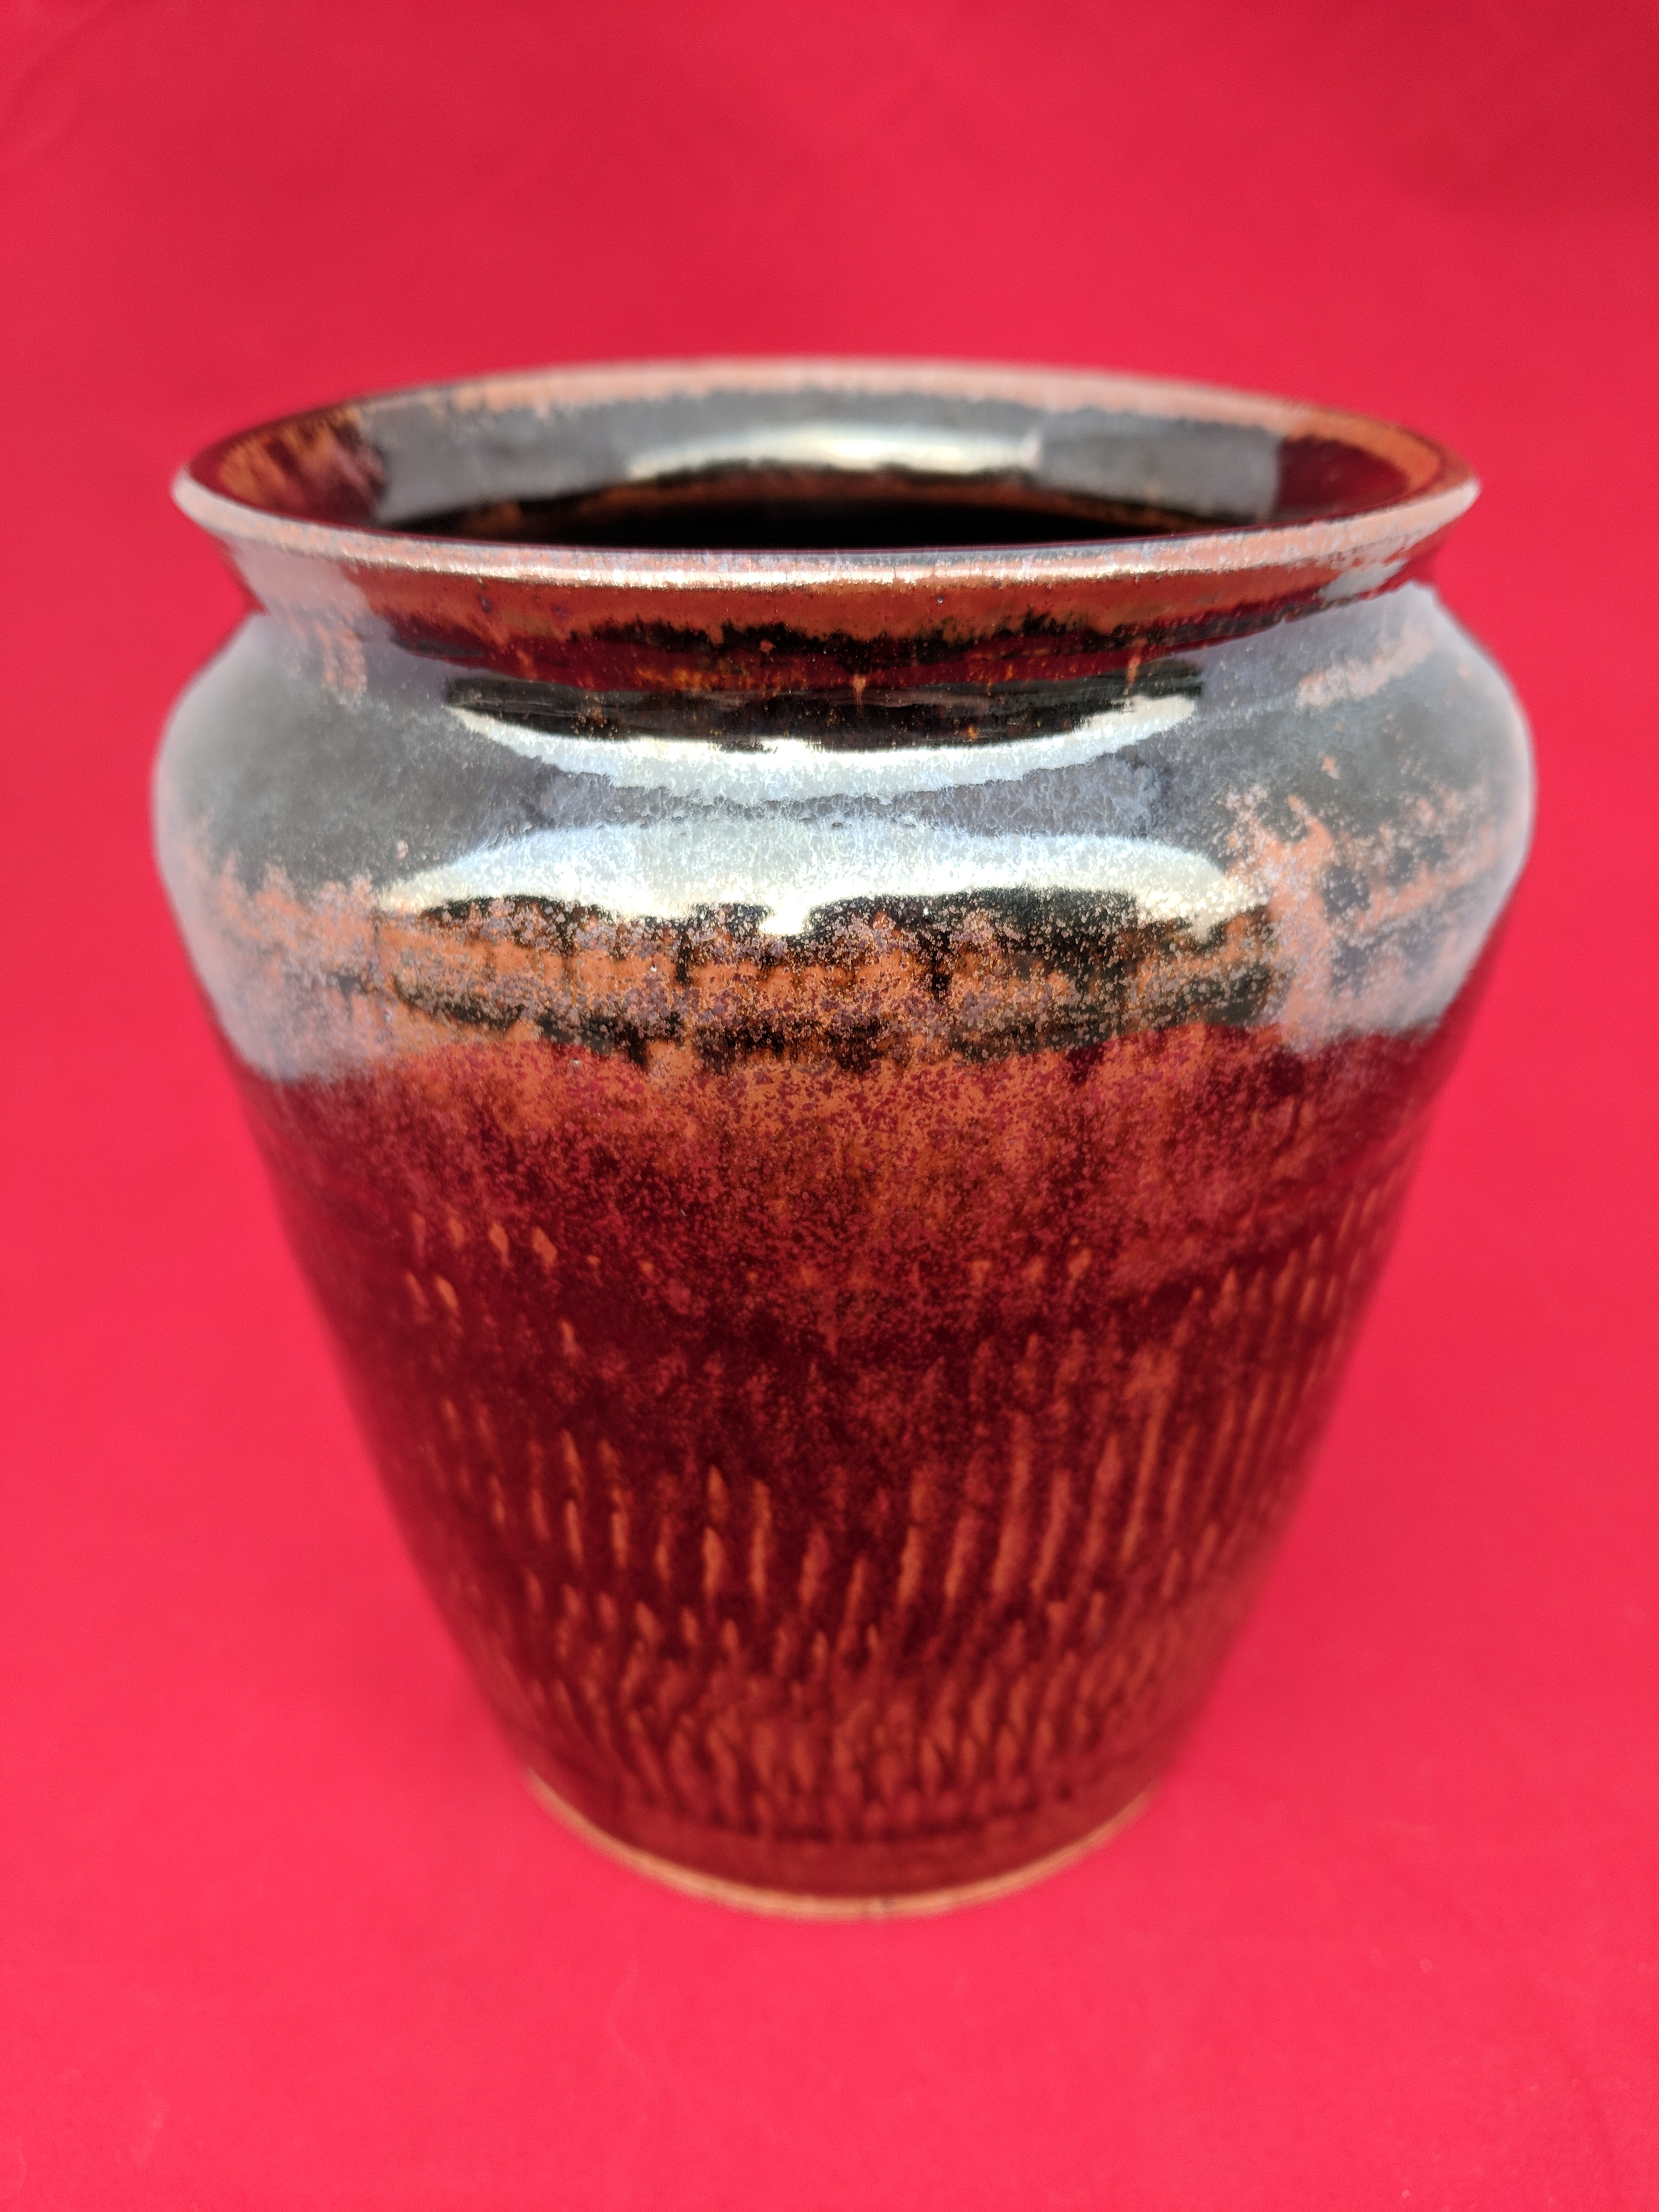 Black and gold textured pottery vase on red background